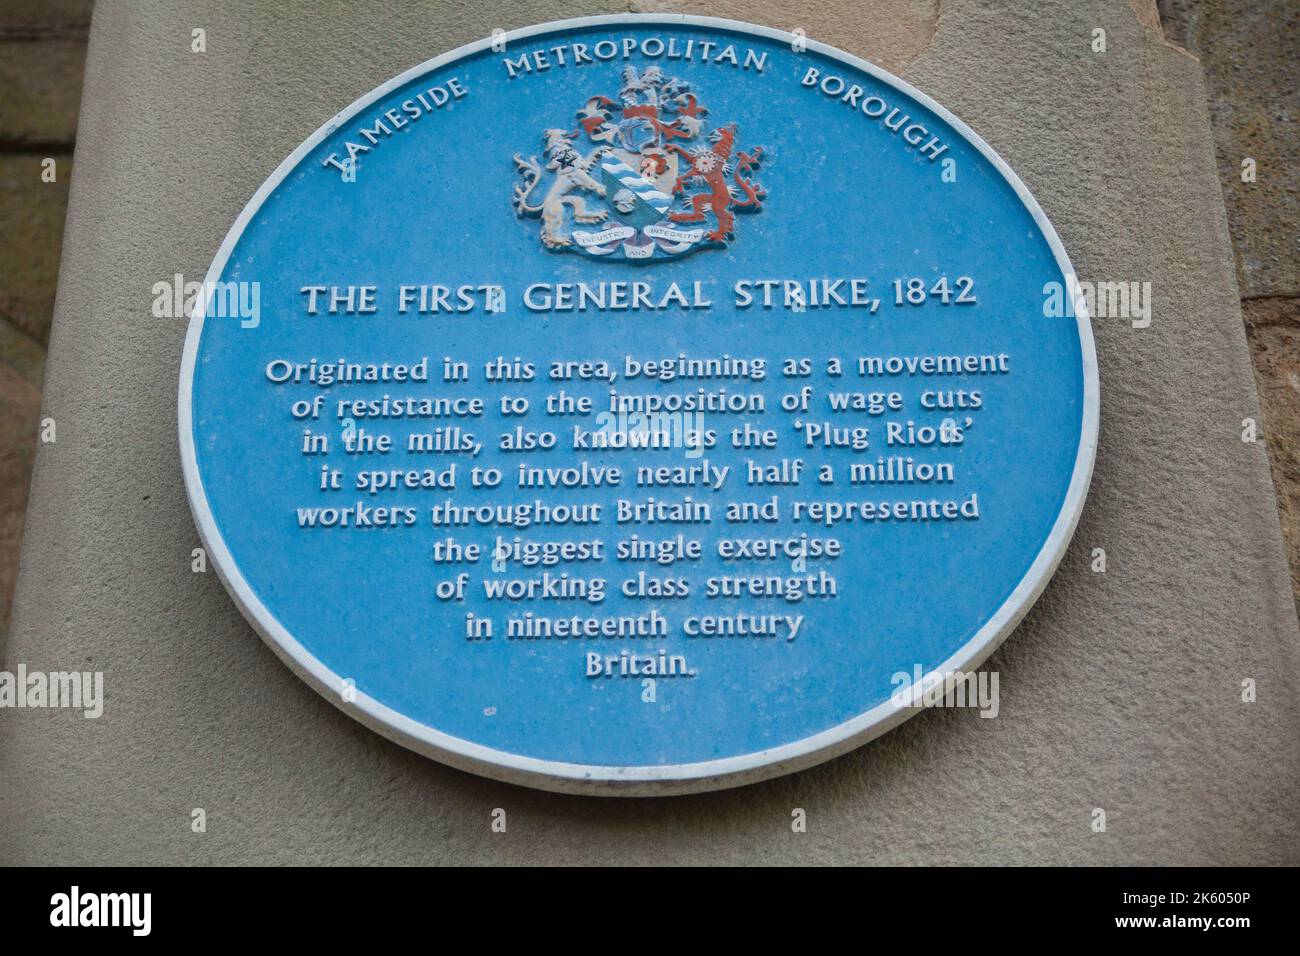 Plaque of The First General Strike 1842 on the old Stalybridge Town Hall Stock Photo